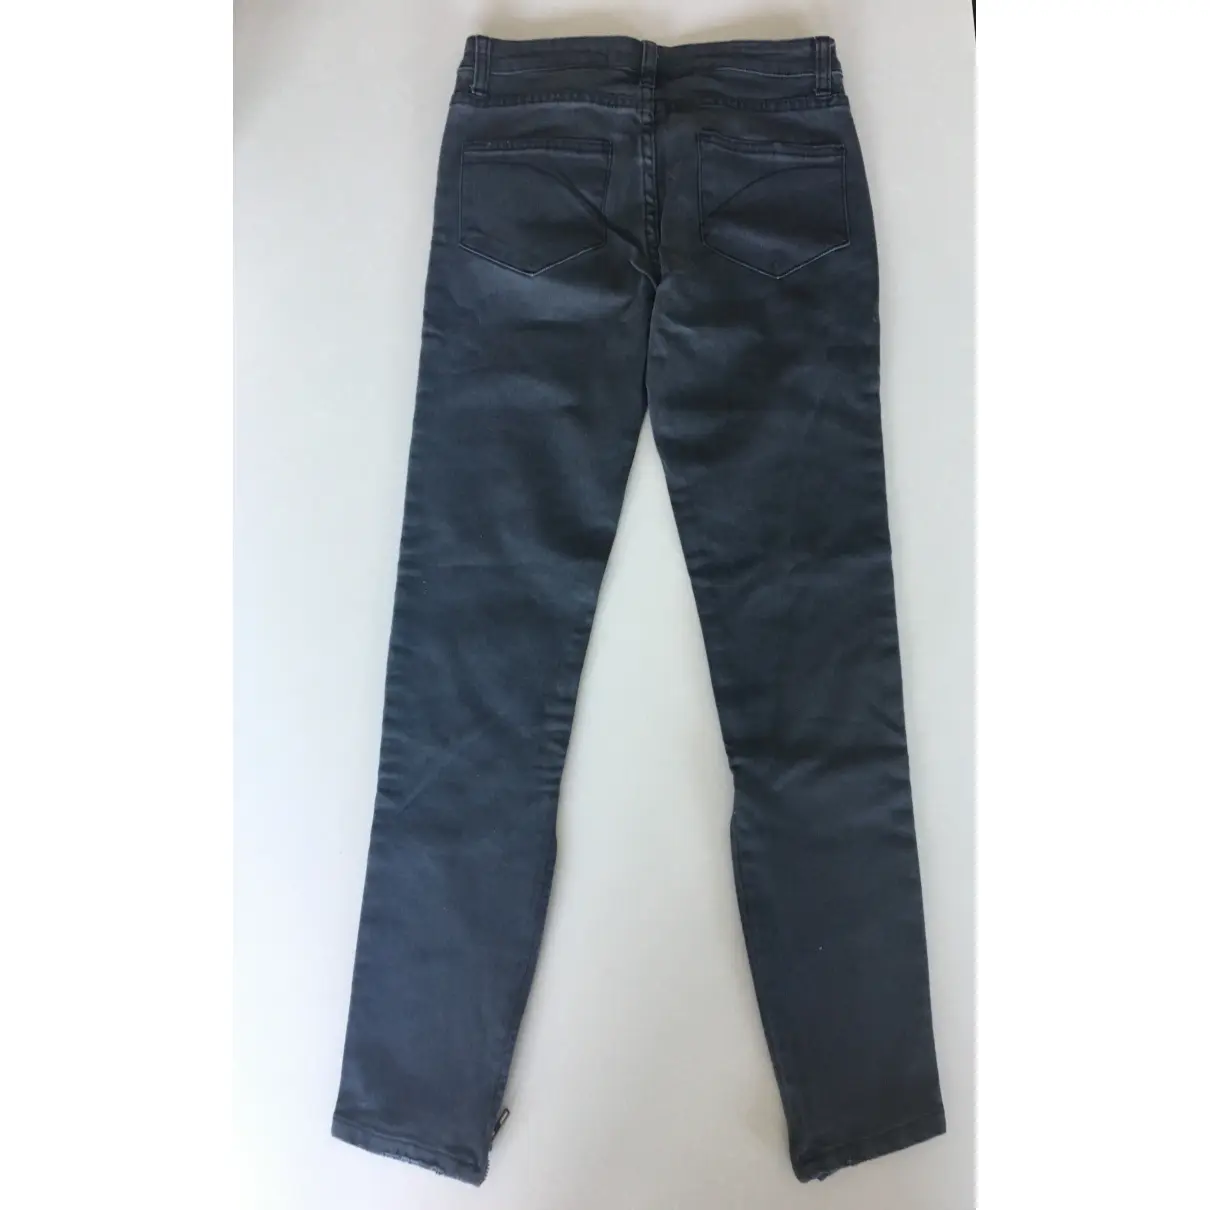 Superfine Slim jeans for sale